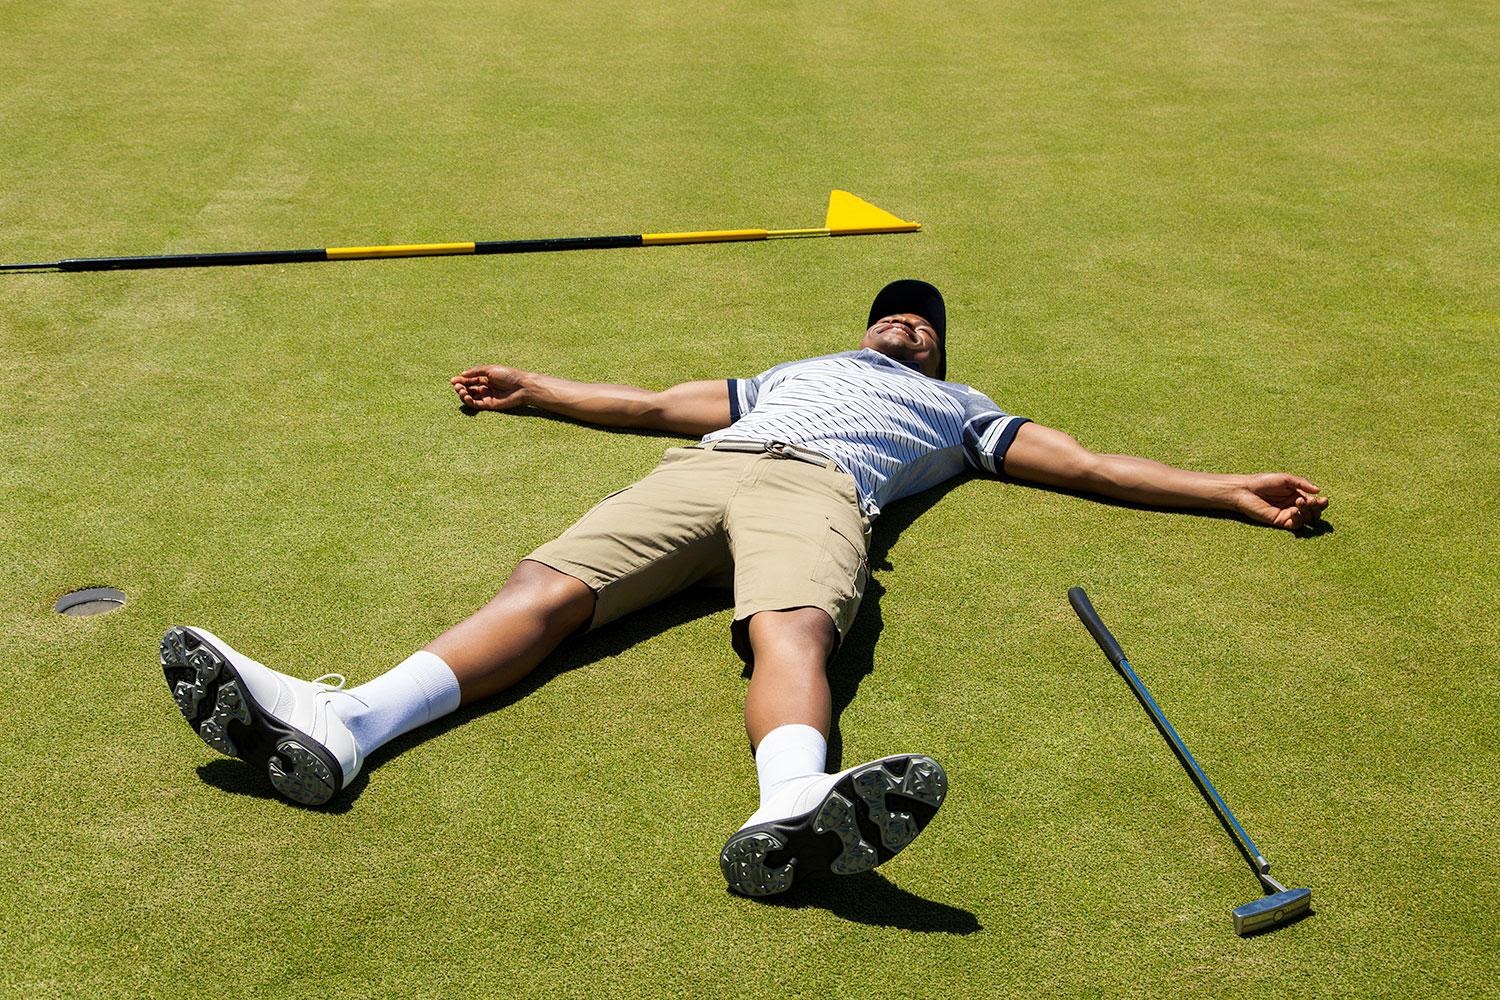 Top 8 Potential Problems with Your Golf Club